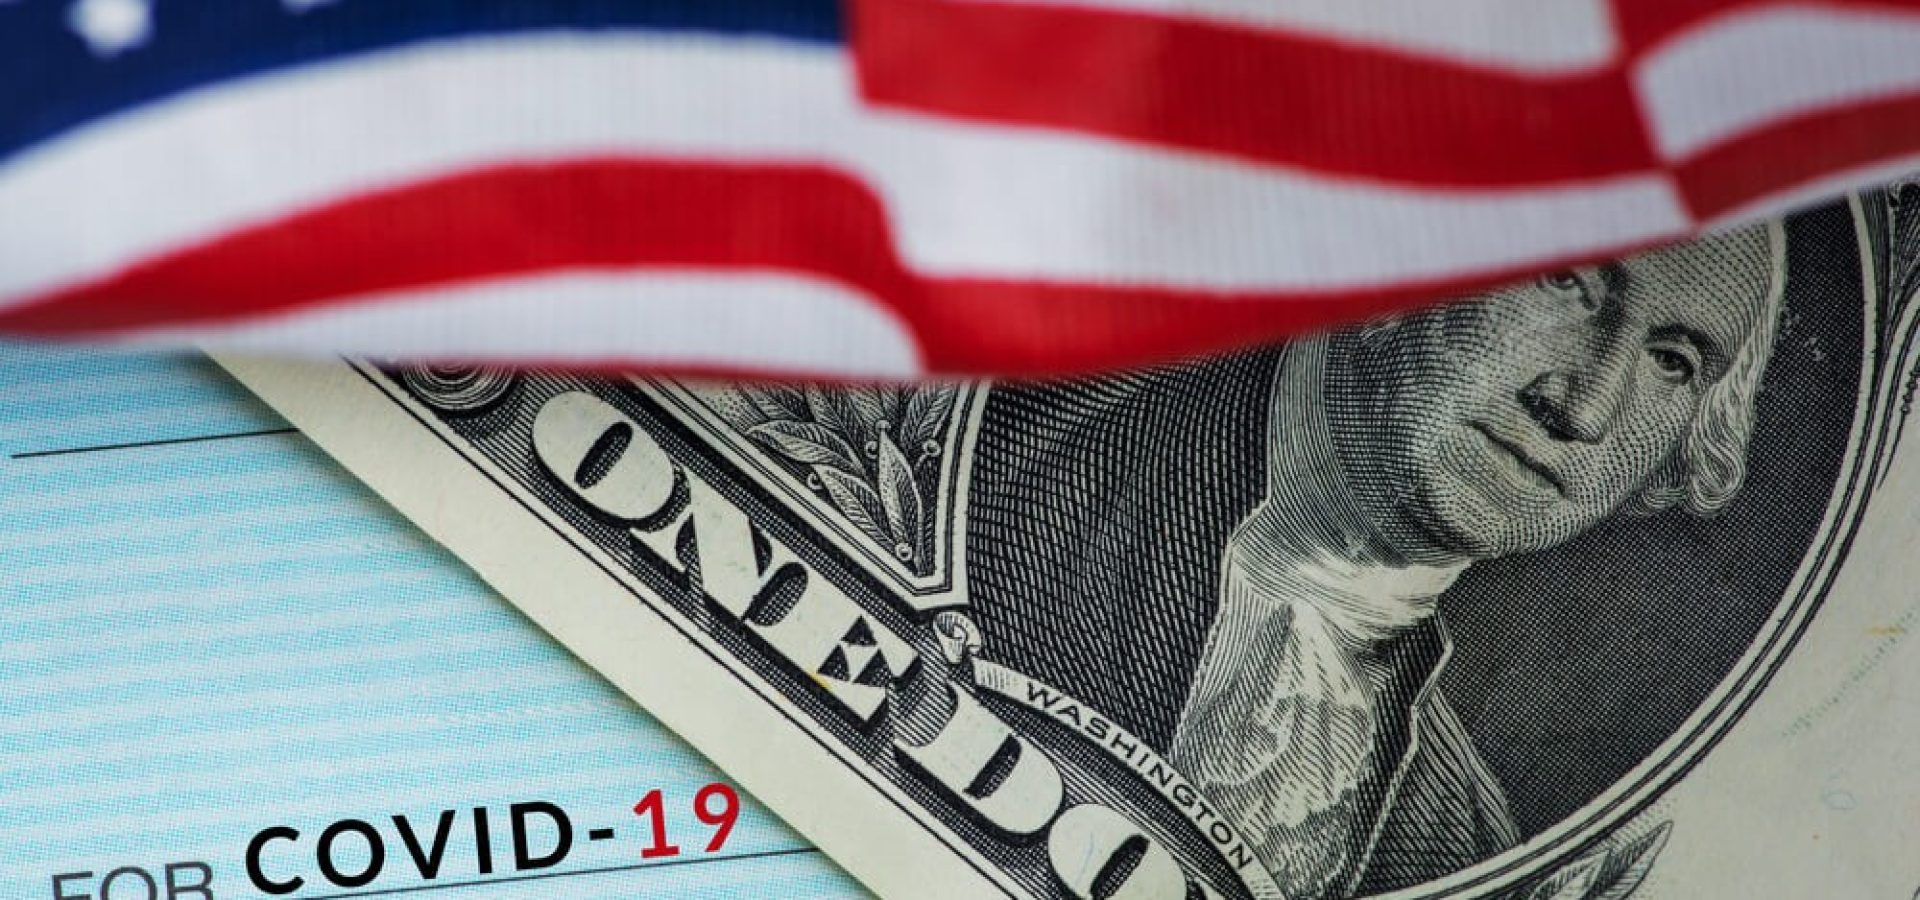 U.S. economy, retail sales, US flag and US dollar with Covid-19 text..